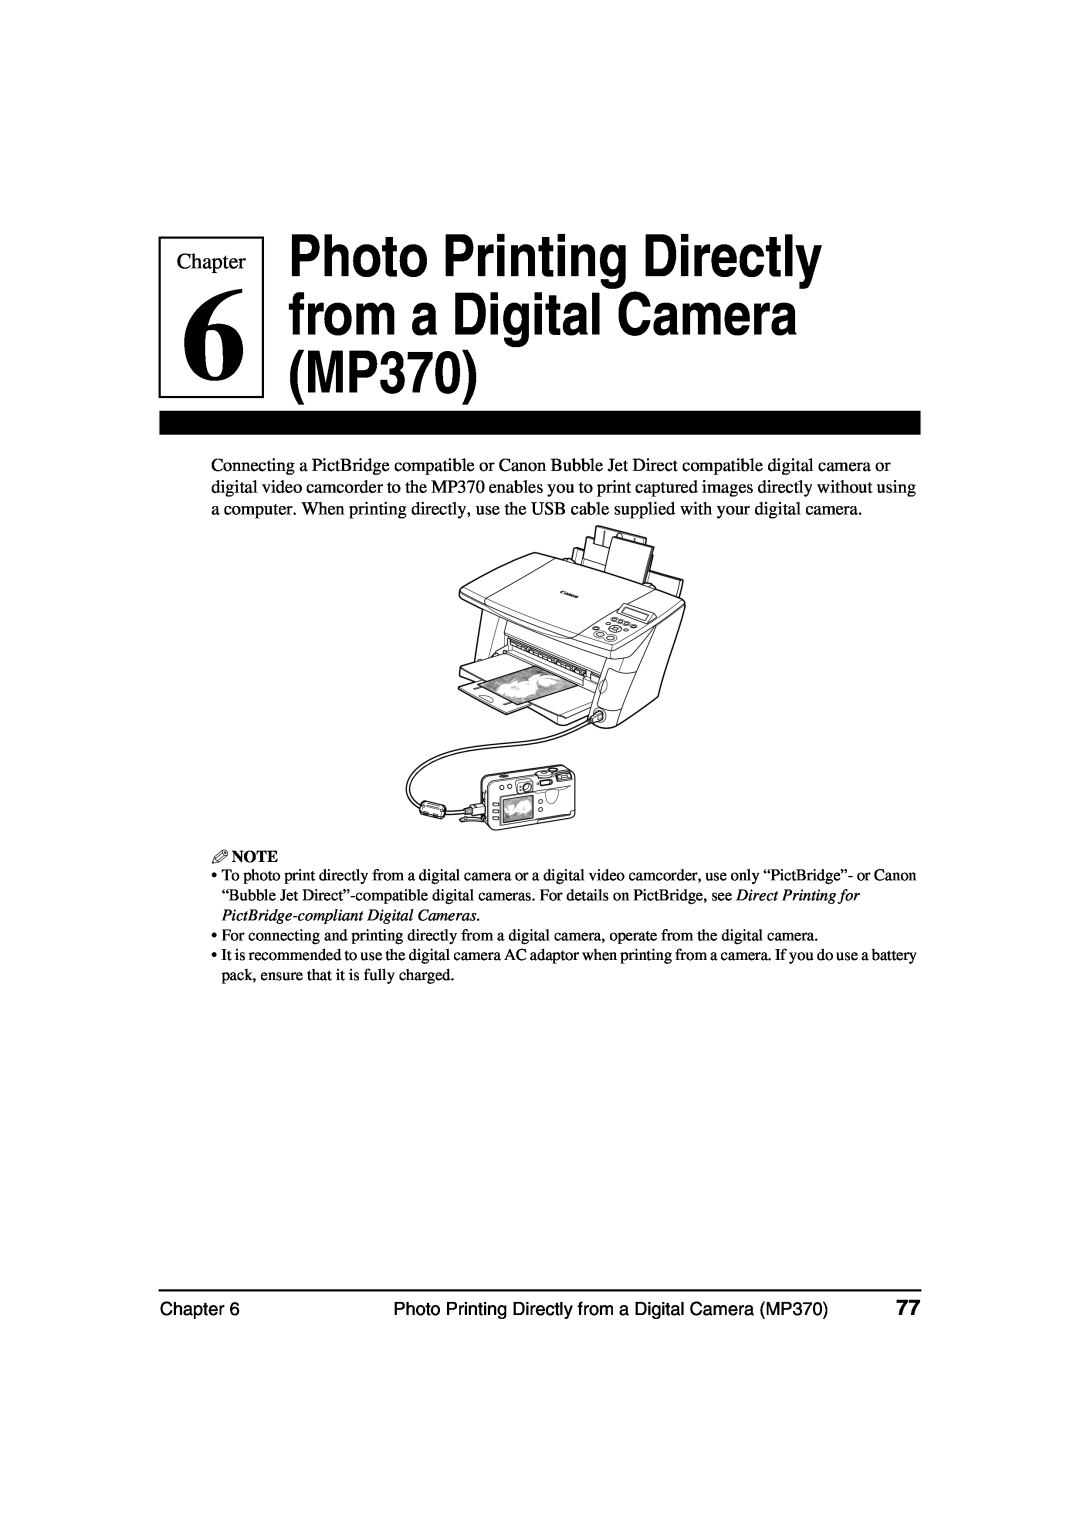 Canon MP360 manual Photo Printing Directly from a Digital Camera MP370, Chapter 